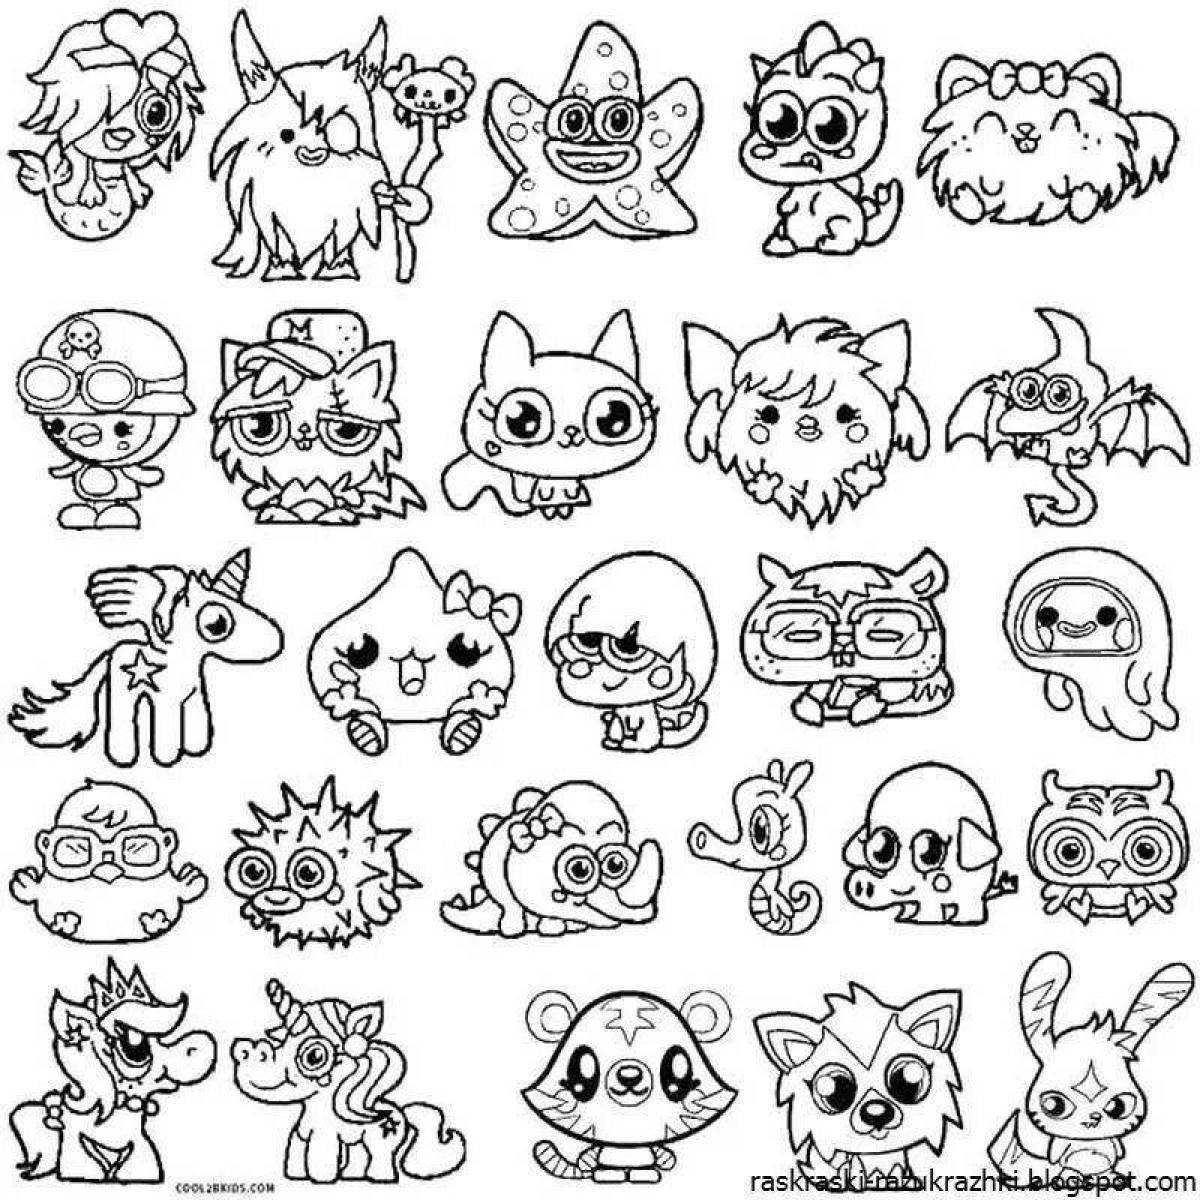 Pictures small for stickers #1